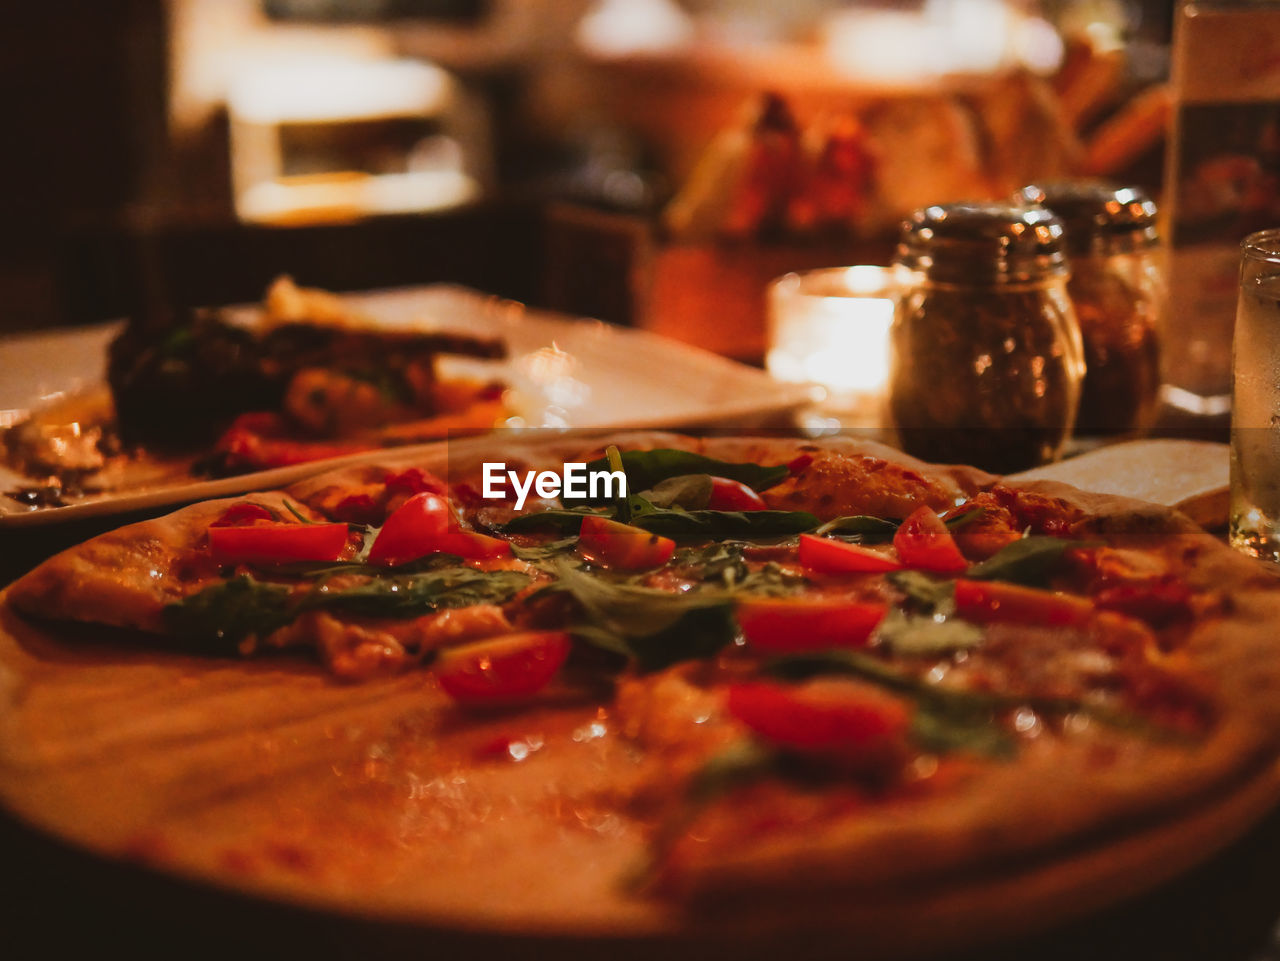 CLOSE-UP OF PIZZA ON TABLE IN RESTAURANT